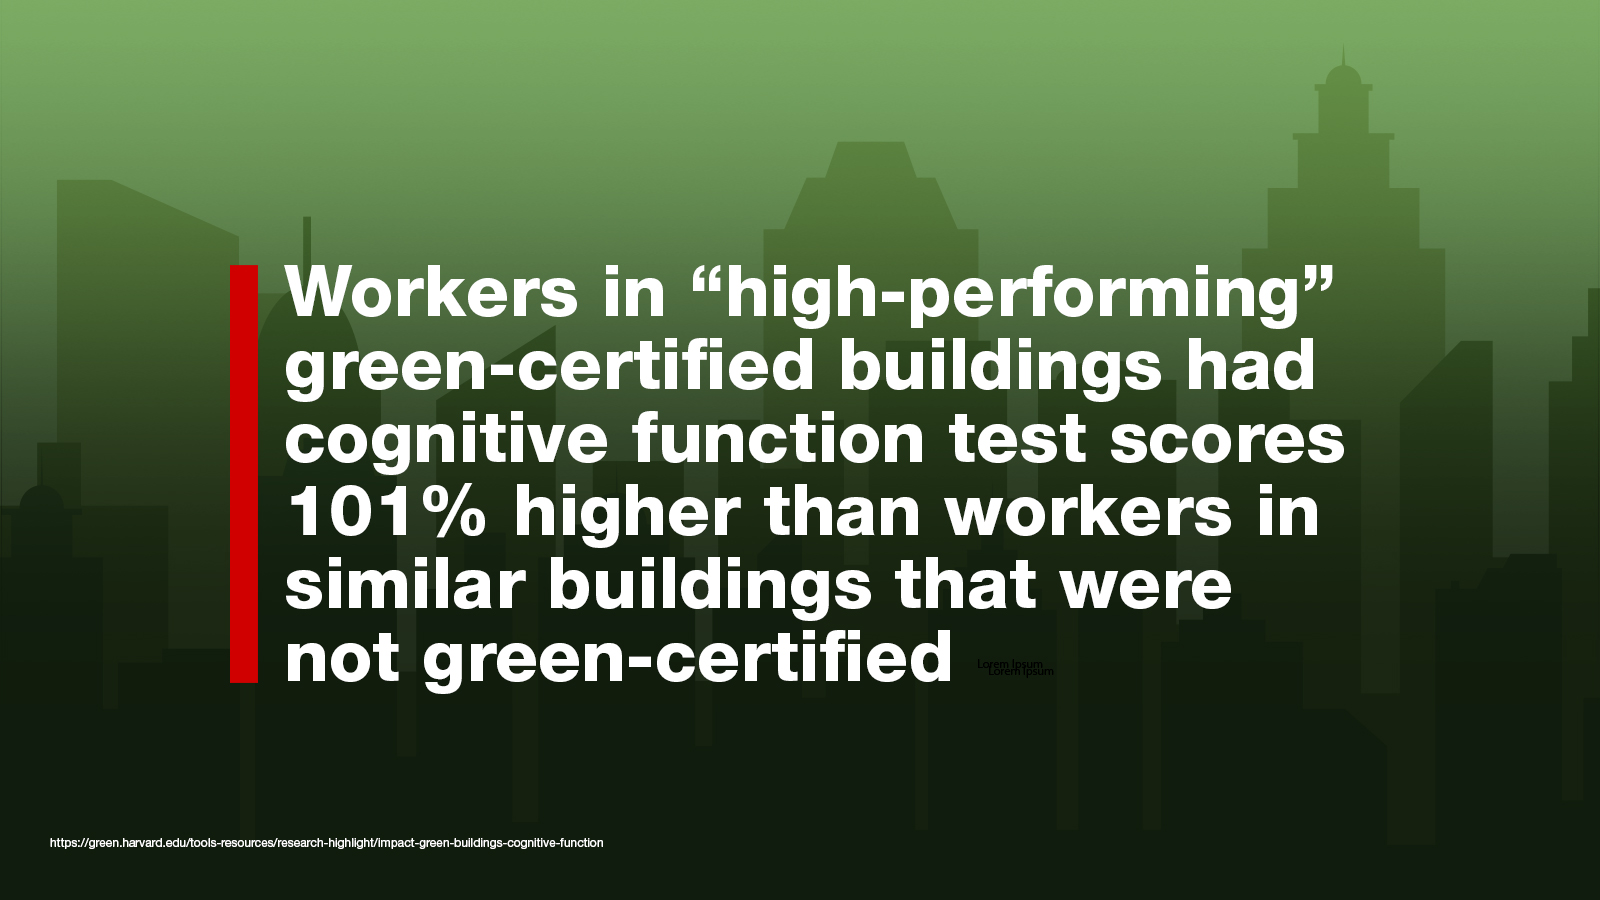 Workers in high-performing green-certified buildings had much higher cognitive function test scores.